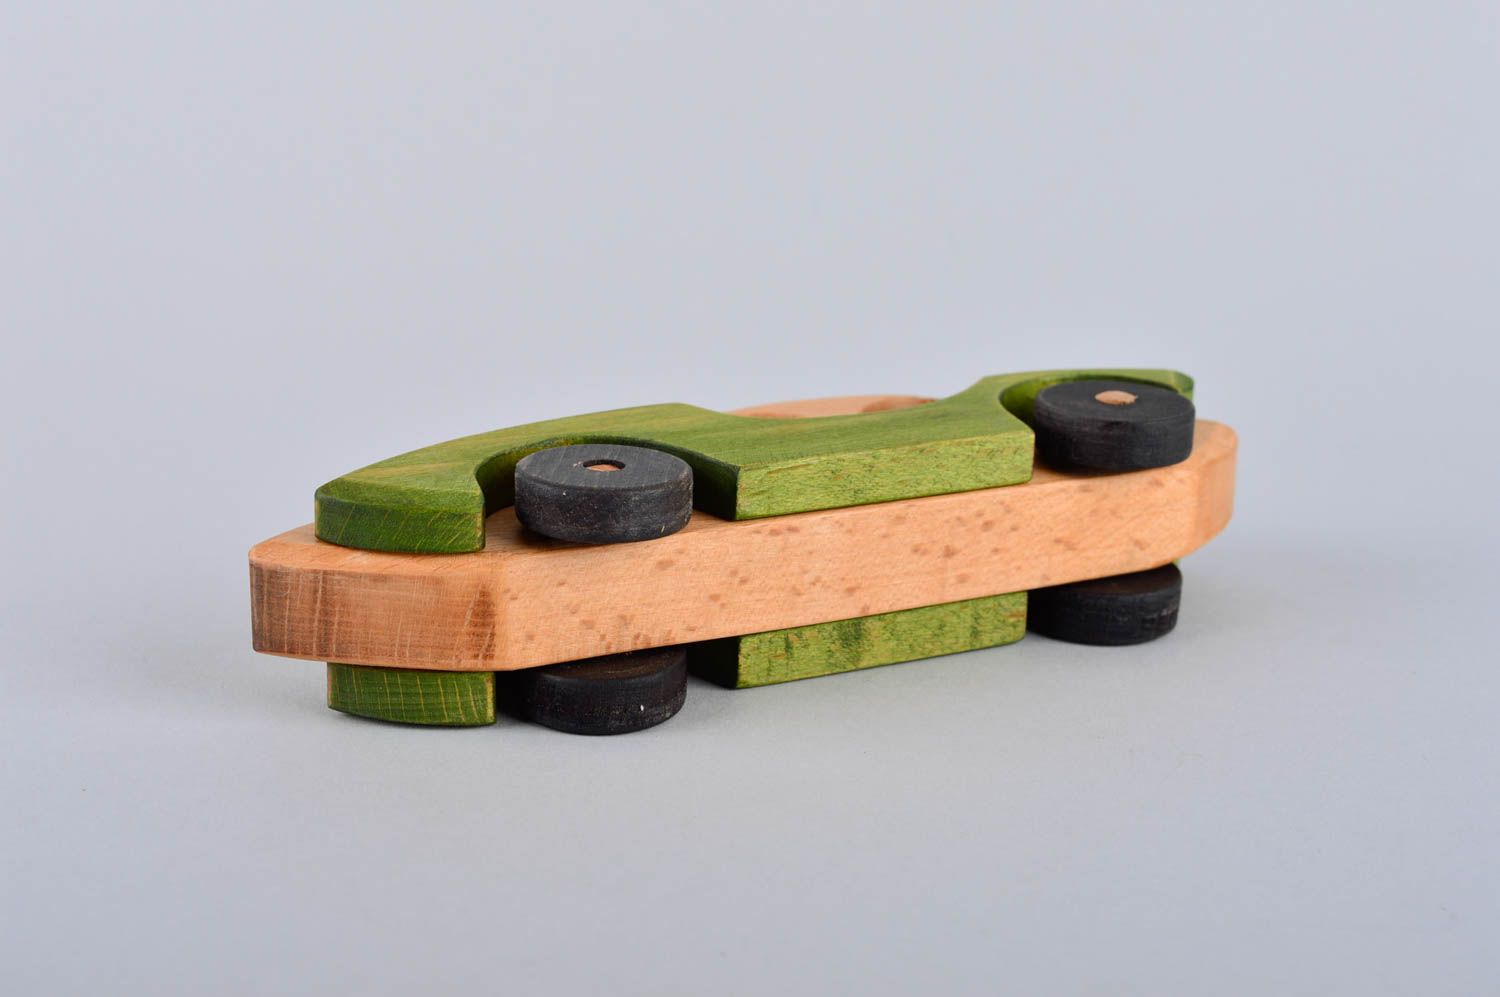 Wooden toy unusual toy for kids designer toy gift ideas nursery decor photo 4